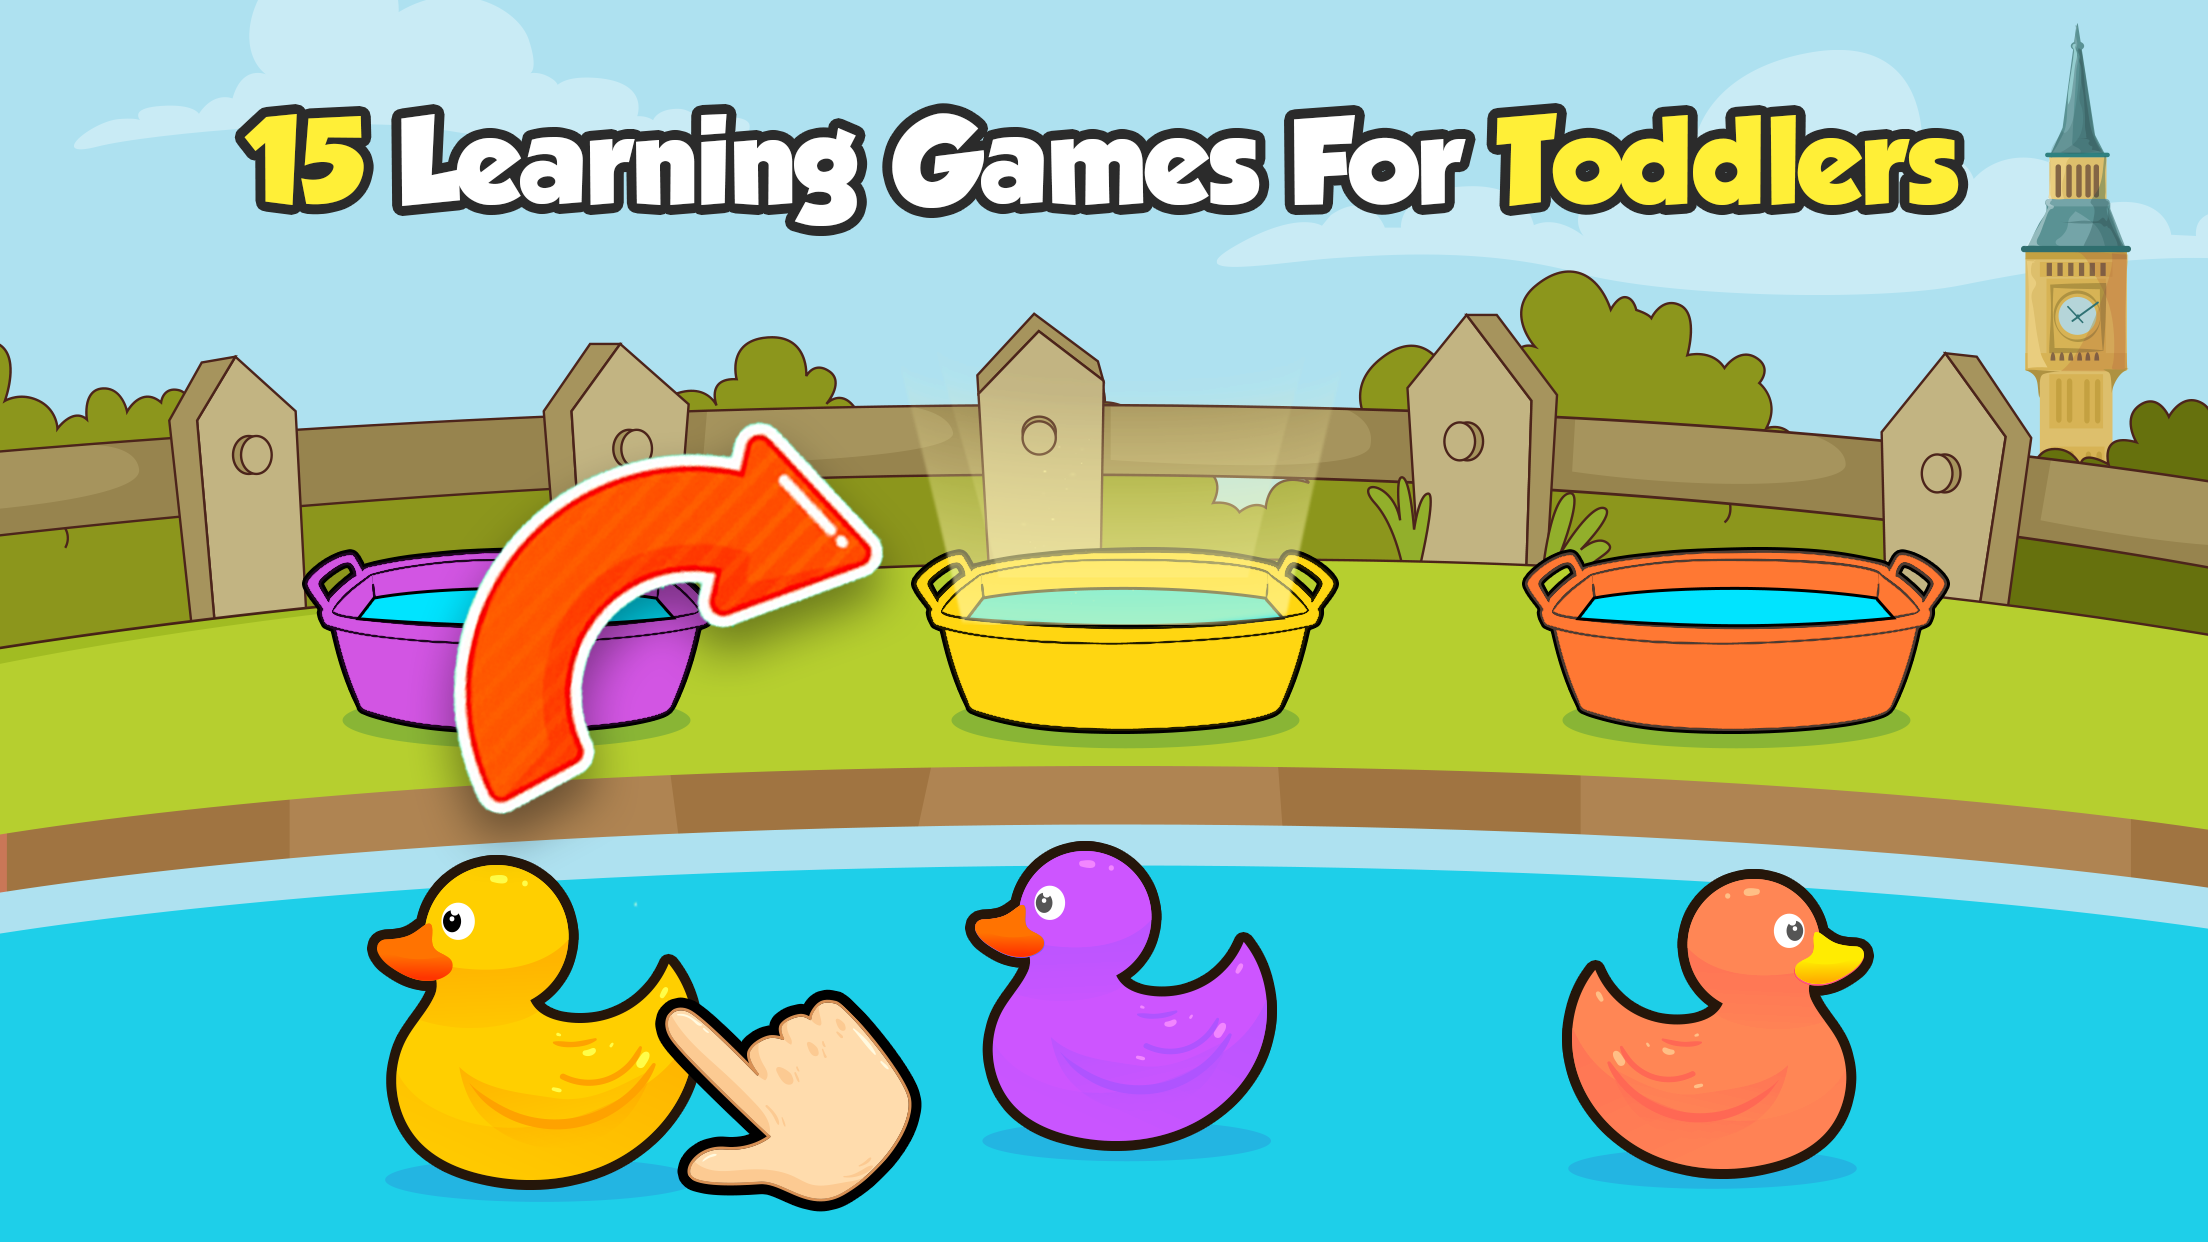 educational games 3 year olds can play